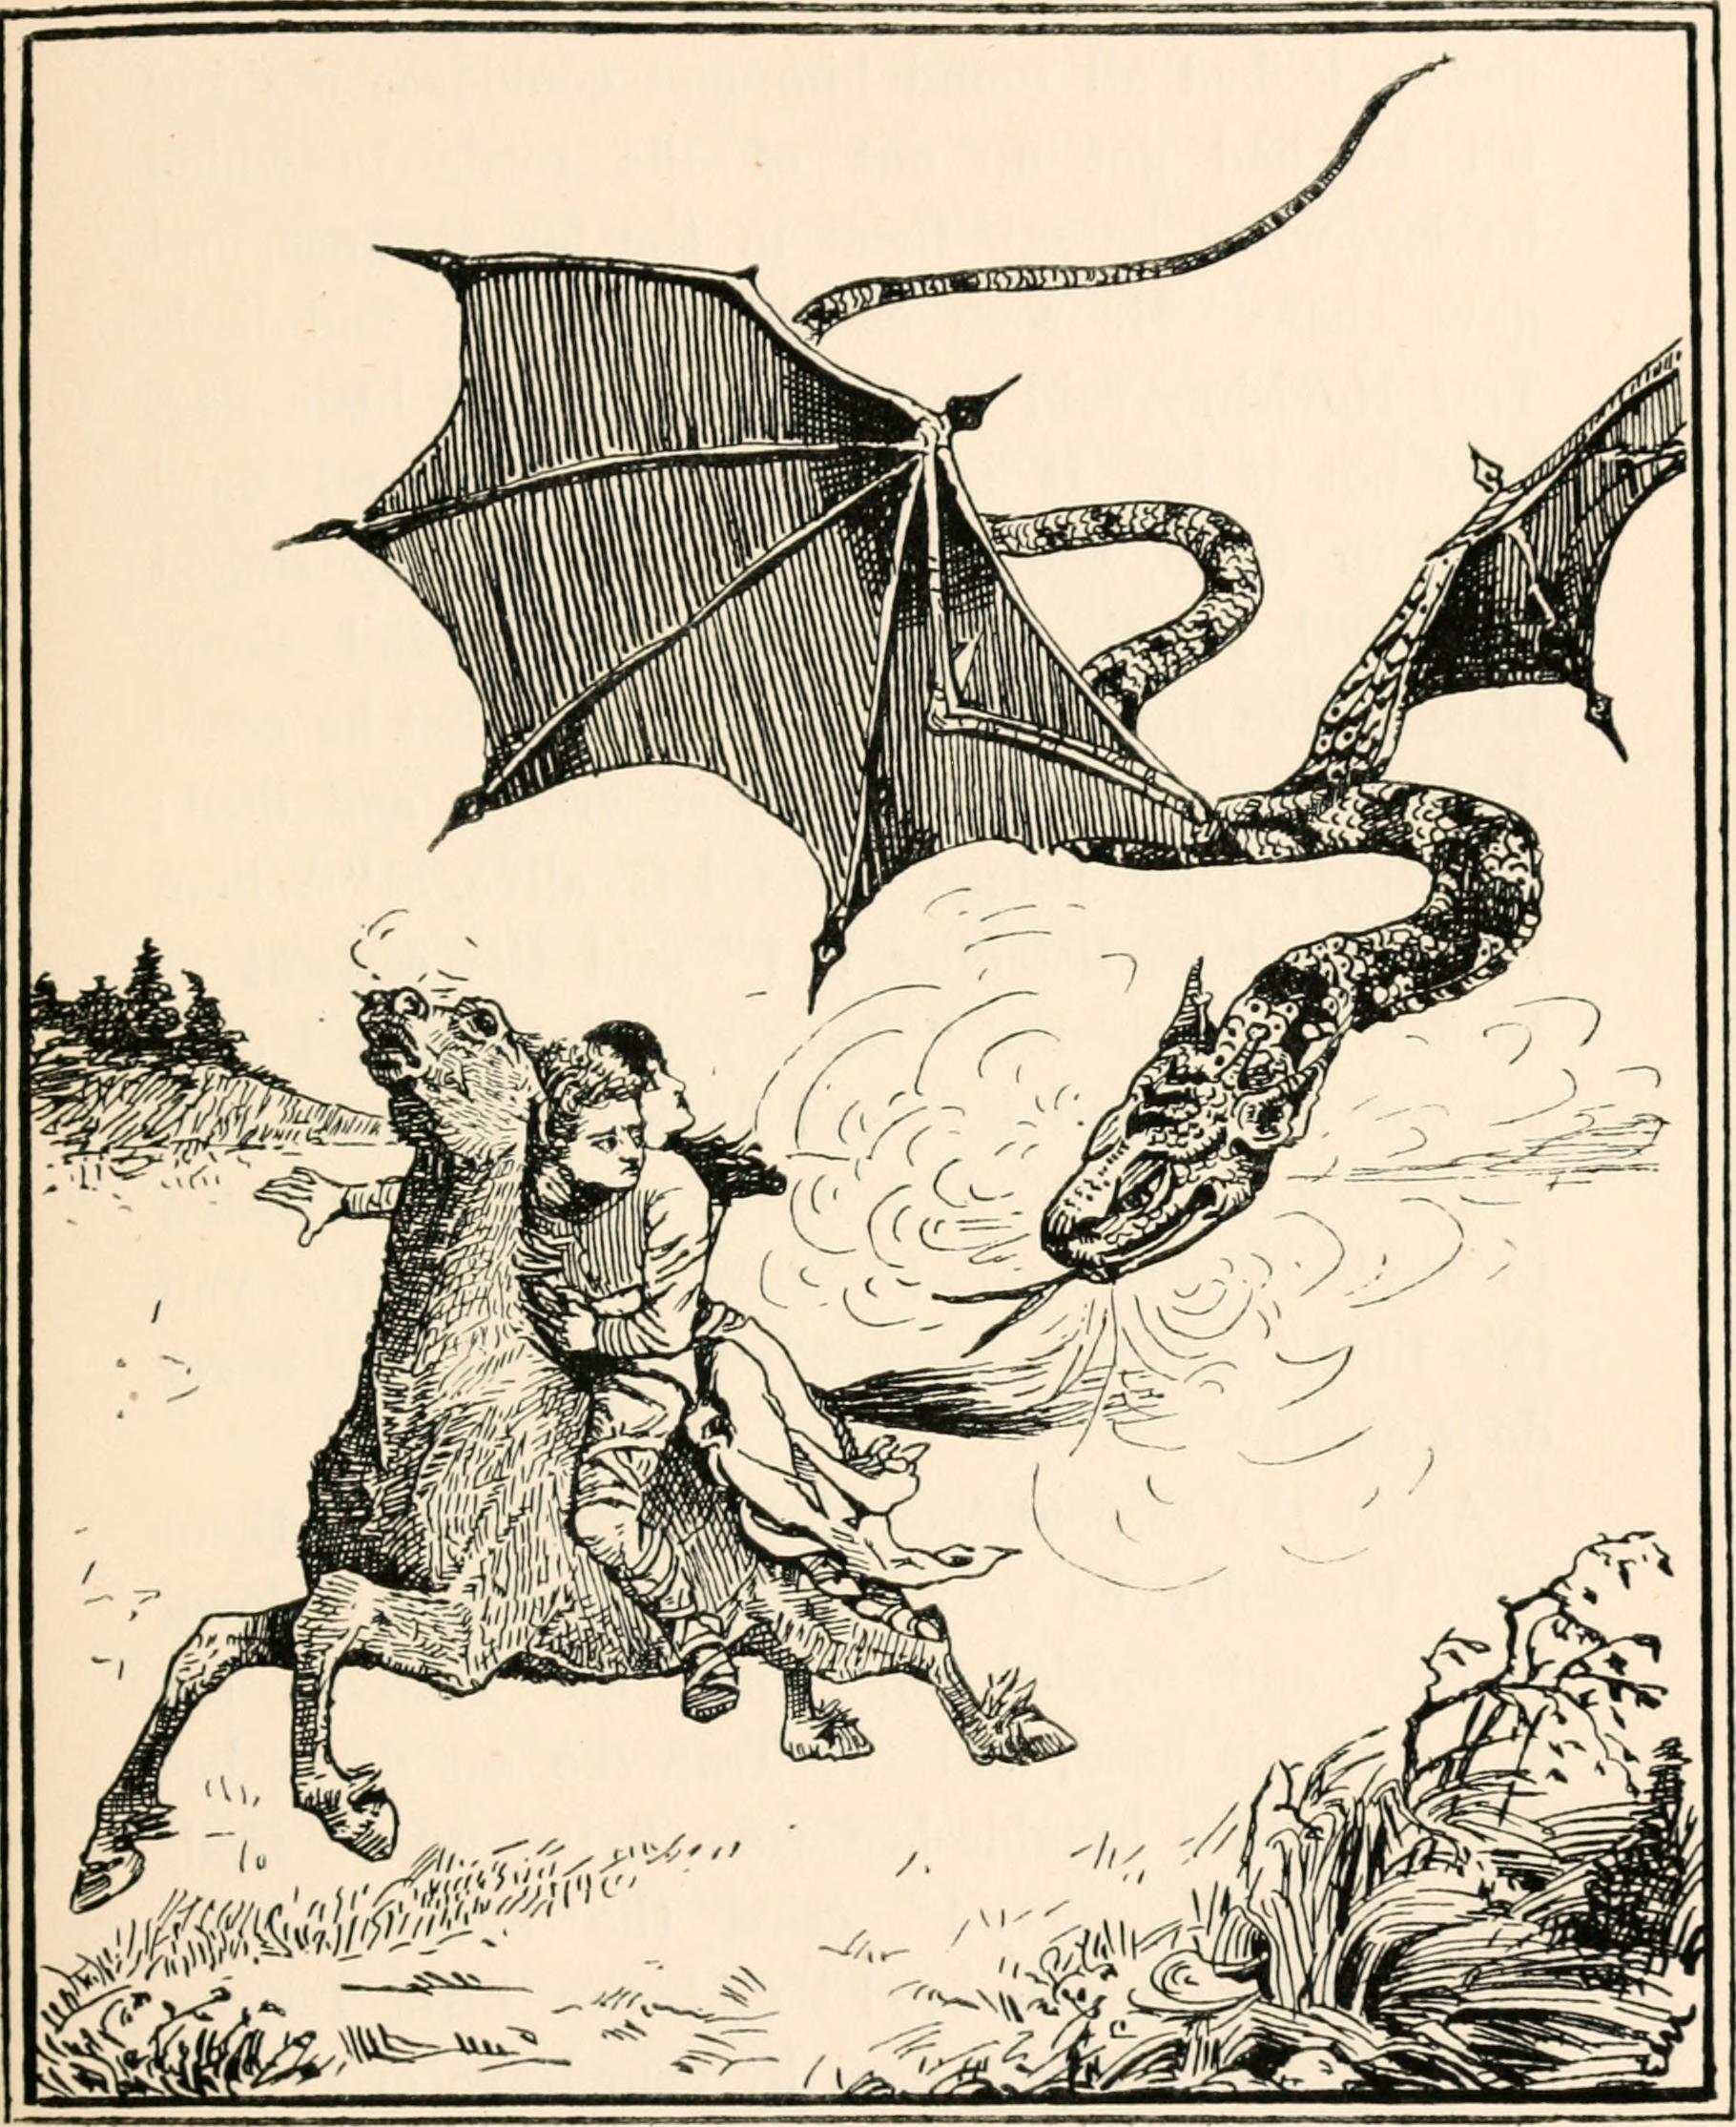 Fairy tale illustration of a couple fleeing a dragon on a horse.